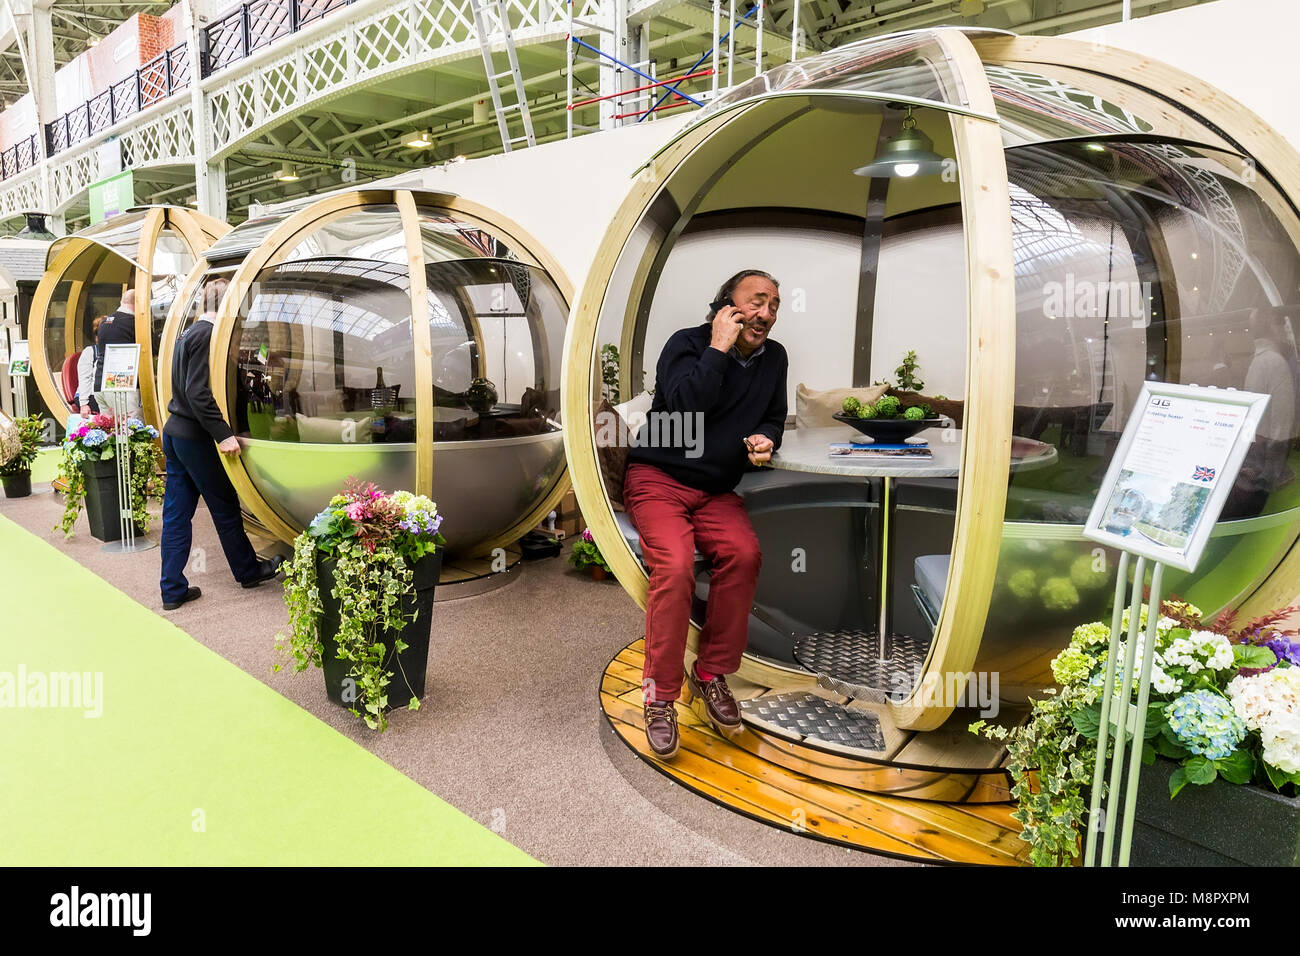 London, UK. 19 March 2018 Rotate seaters by Ornate Garden at The Ideal Home 2018. © Laura De Meo/ Alamy Live News Stock Photo